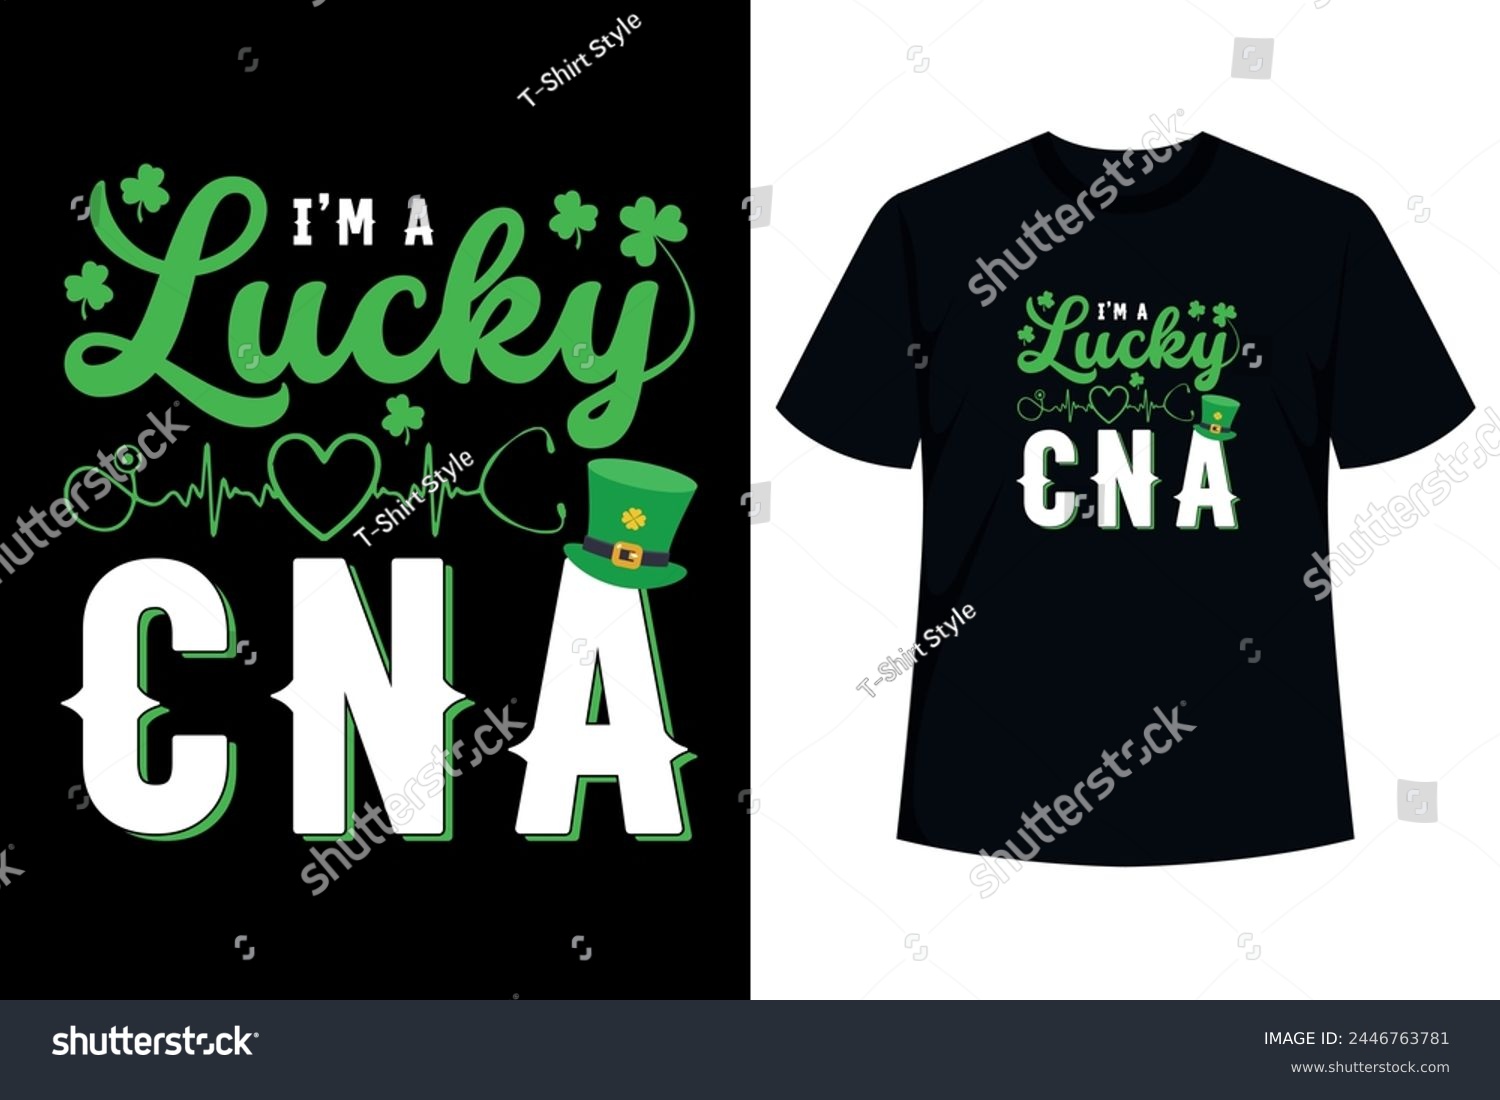 SVG of I'm a Lucky CNA Nurse funny graphic apparel design St Patricks Day featuring top hat with lucky shamrock leaf is great gift idea for Certified Nursing Assistant. This makes a clover costume party svg